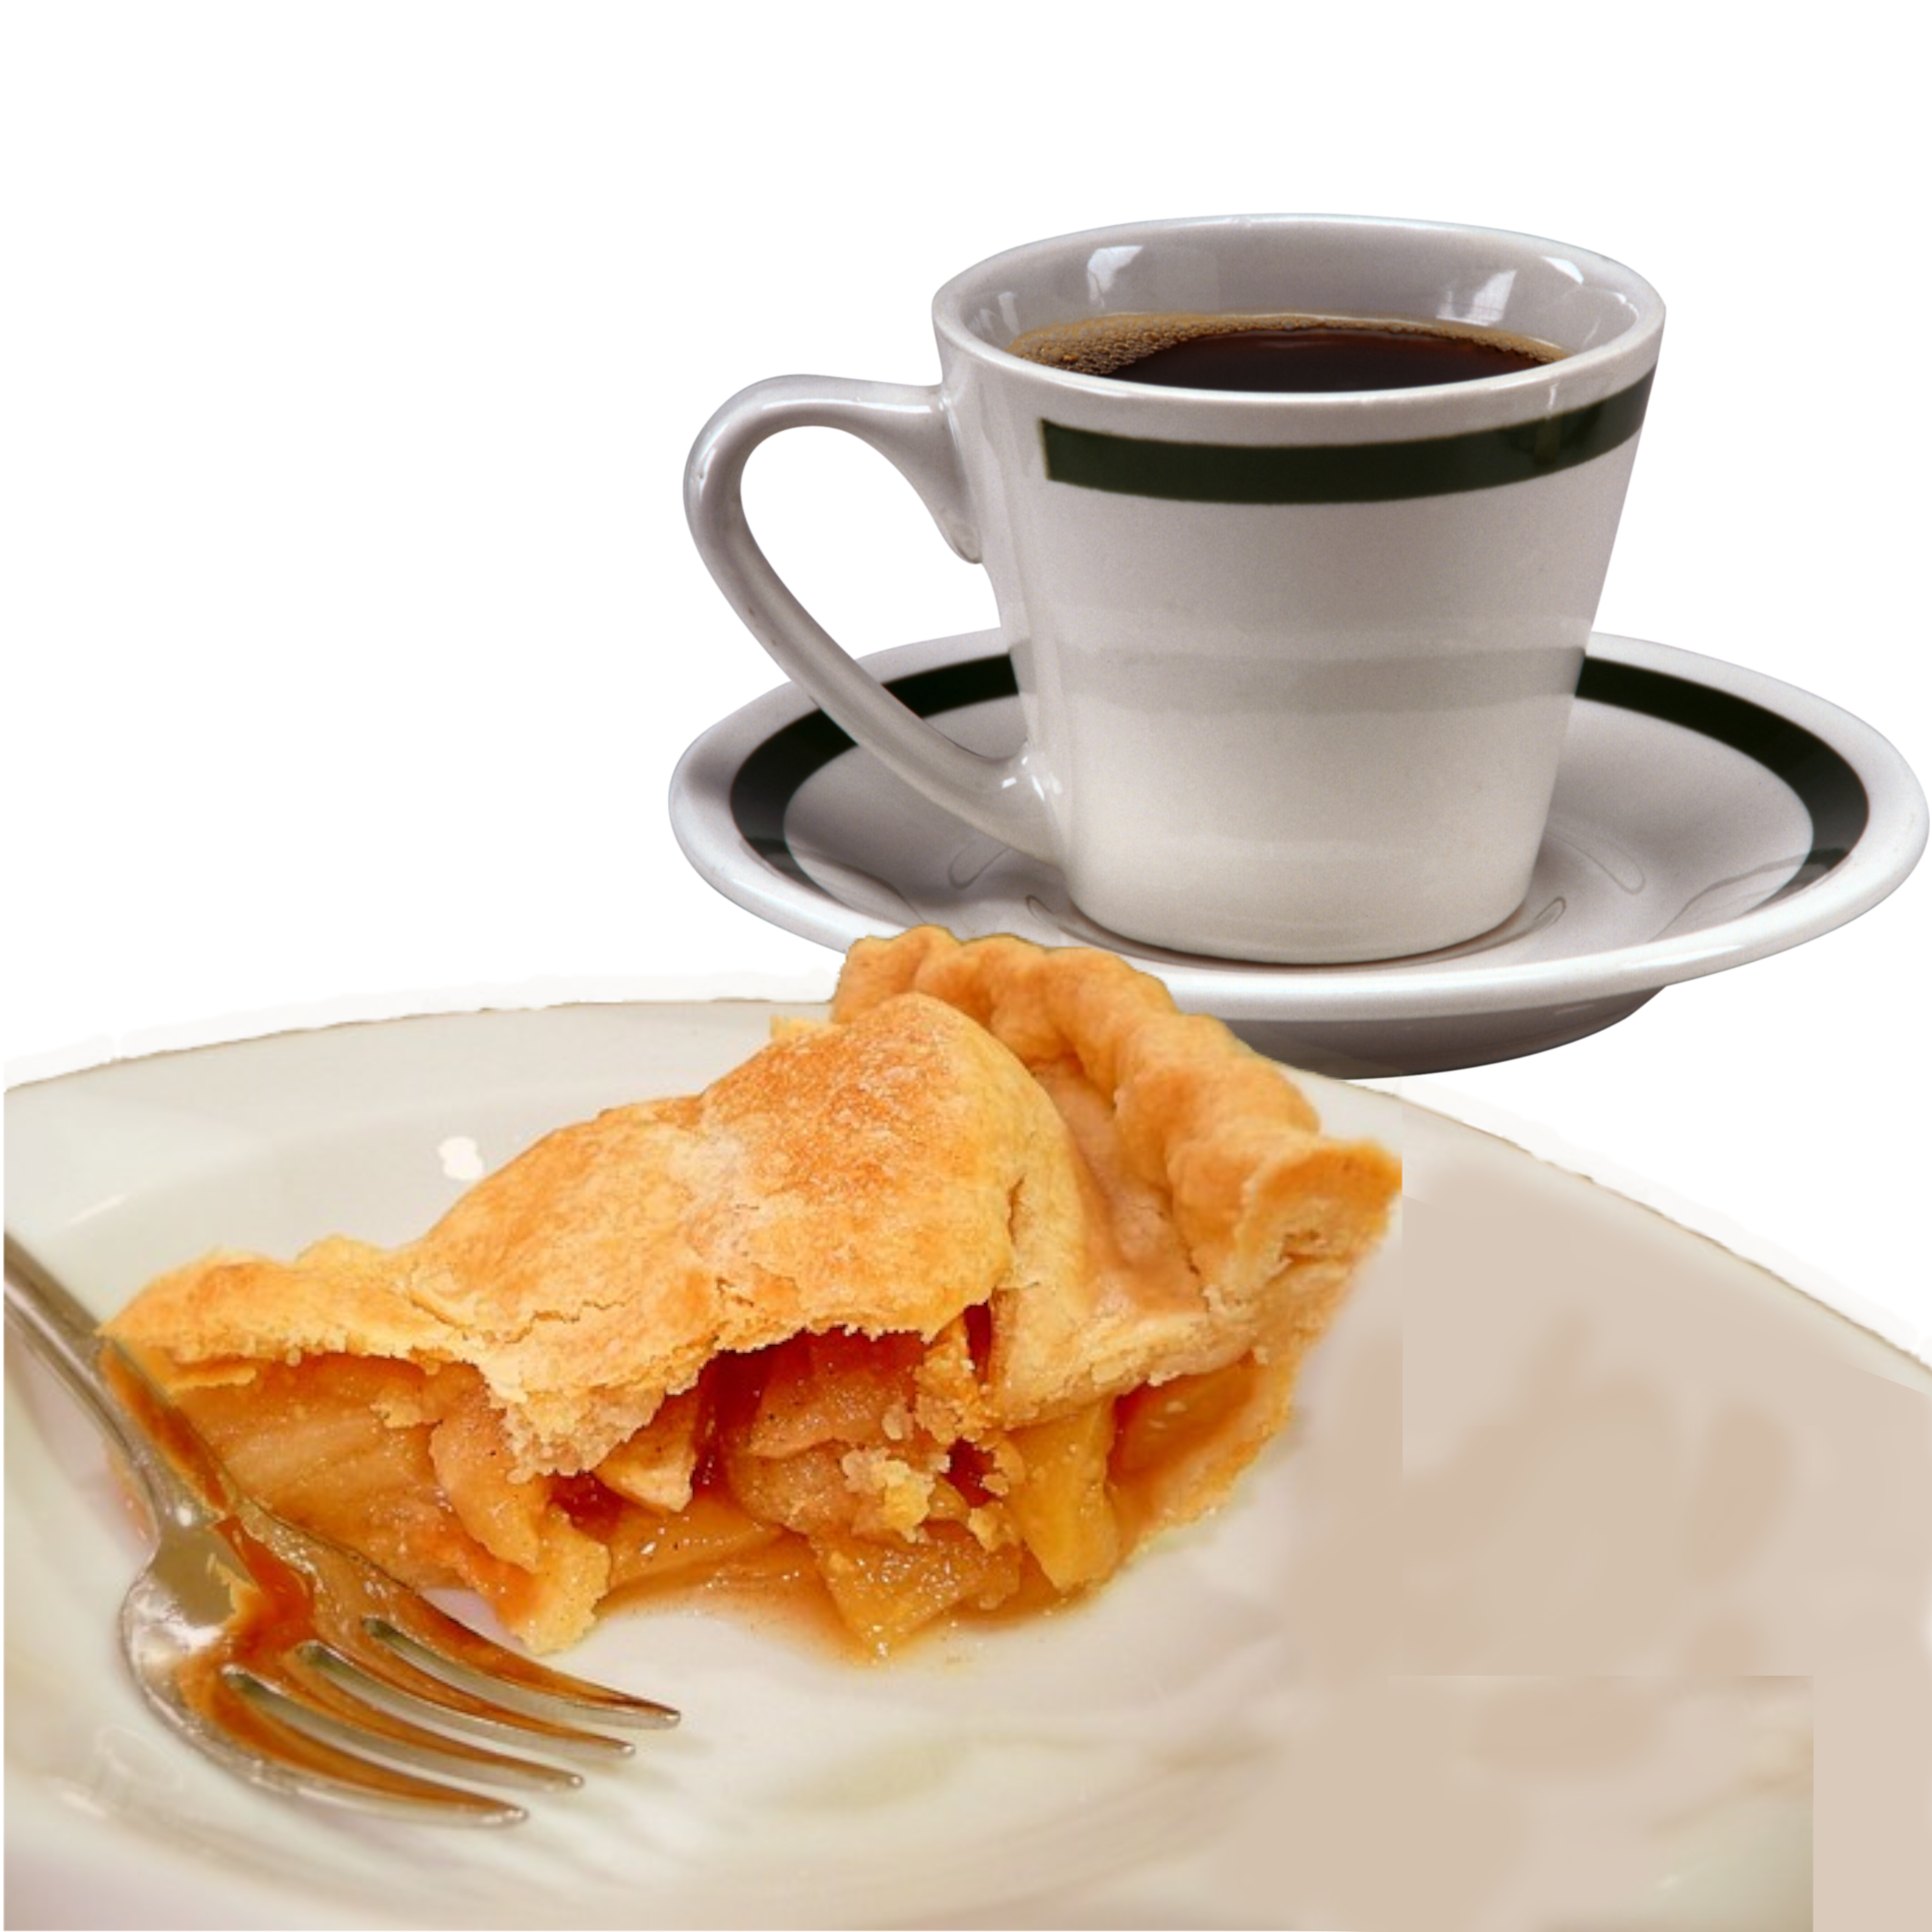 Apple pie and coffee